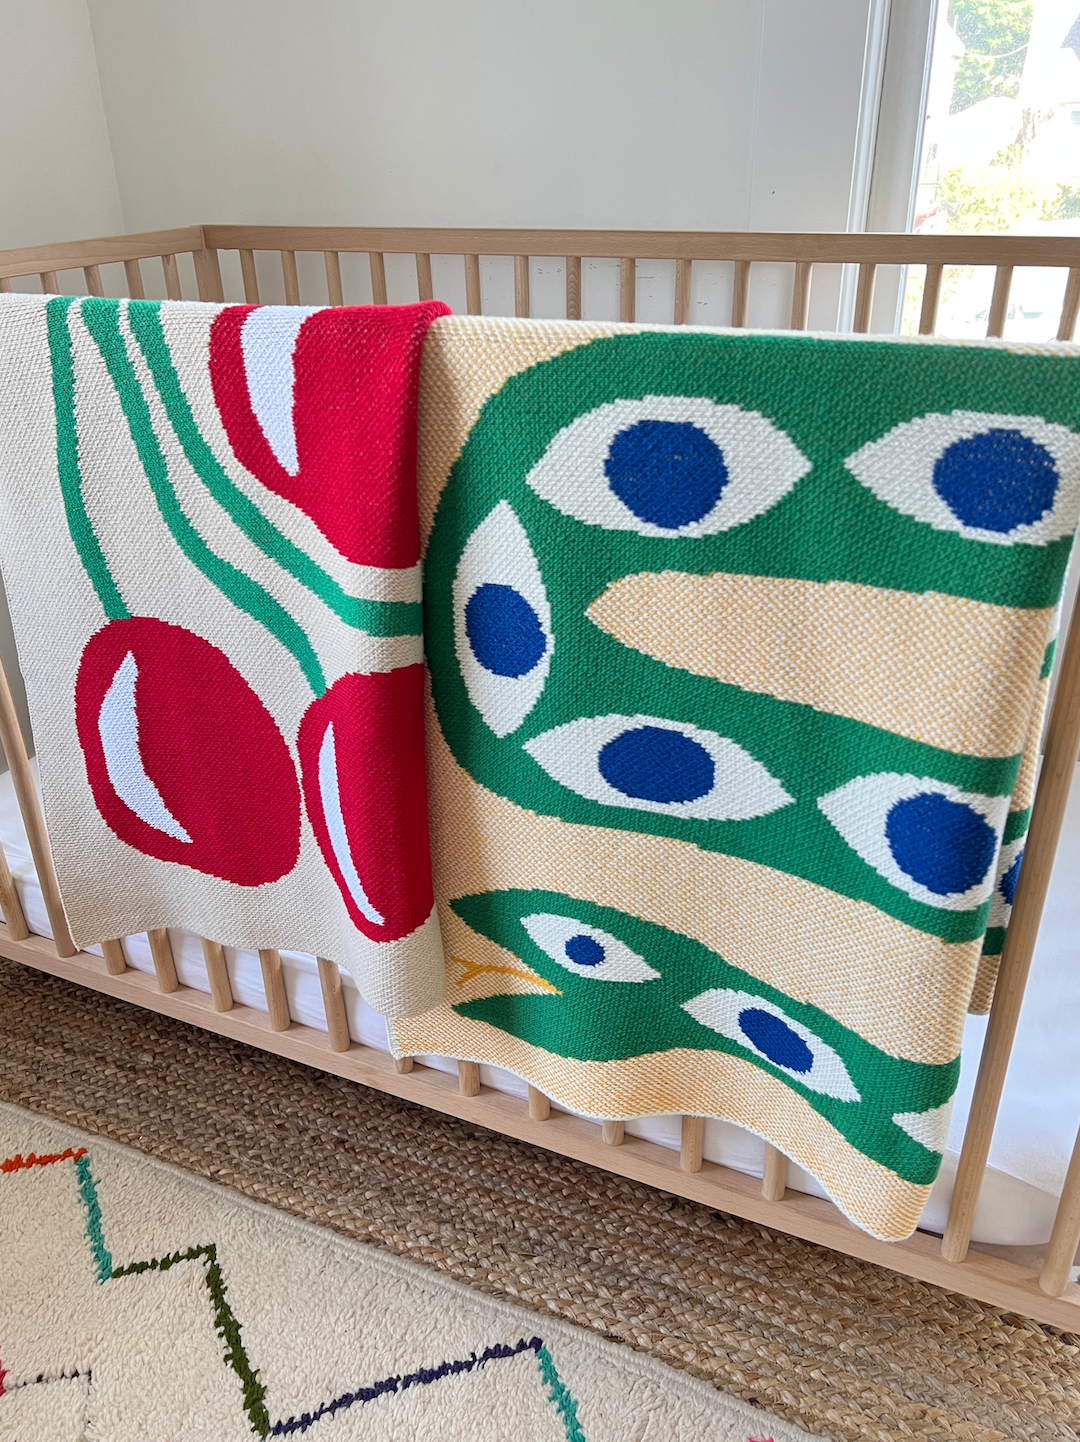 Two mini blankets folded over the edge of a cot, one in a red cherry pattern, one in a pattern of a green snake with blue eye markings